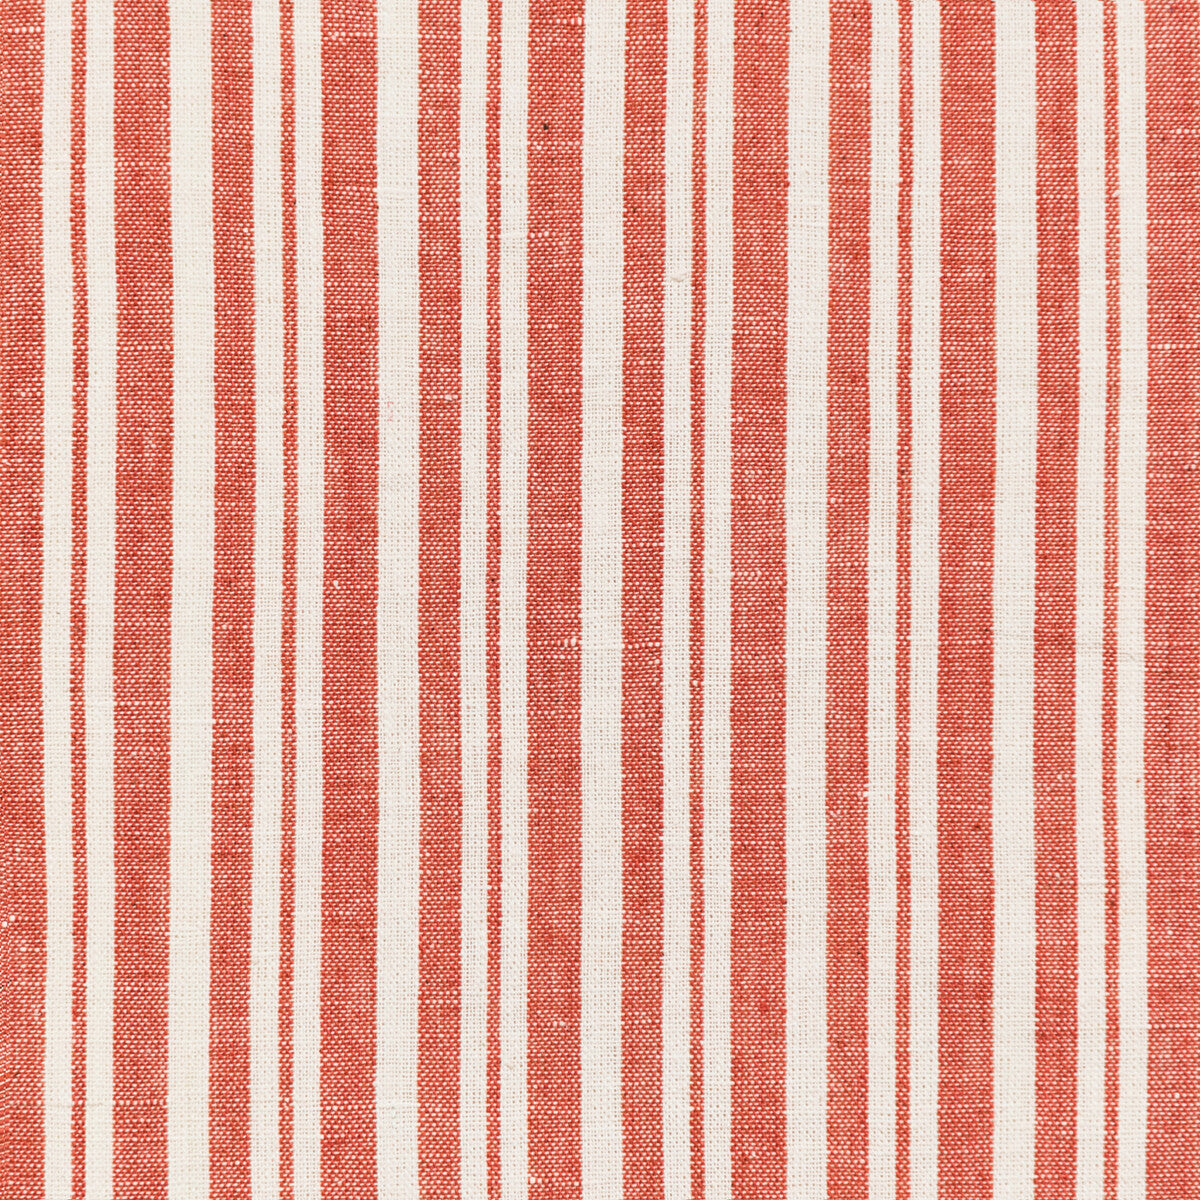 Jaffna fabric in coral color - pattern 35765.12.0 - by Kravet Basics in the Ceylon collection